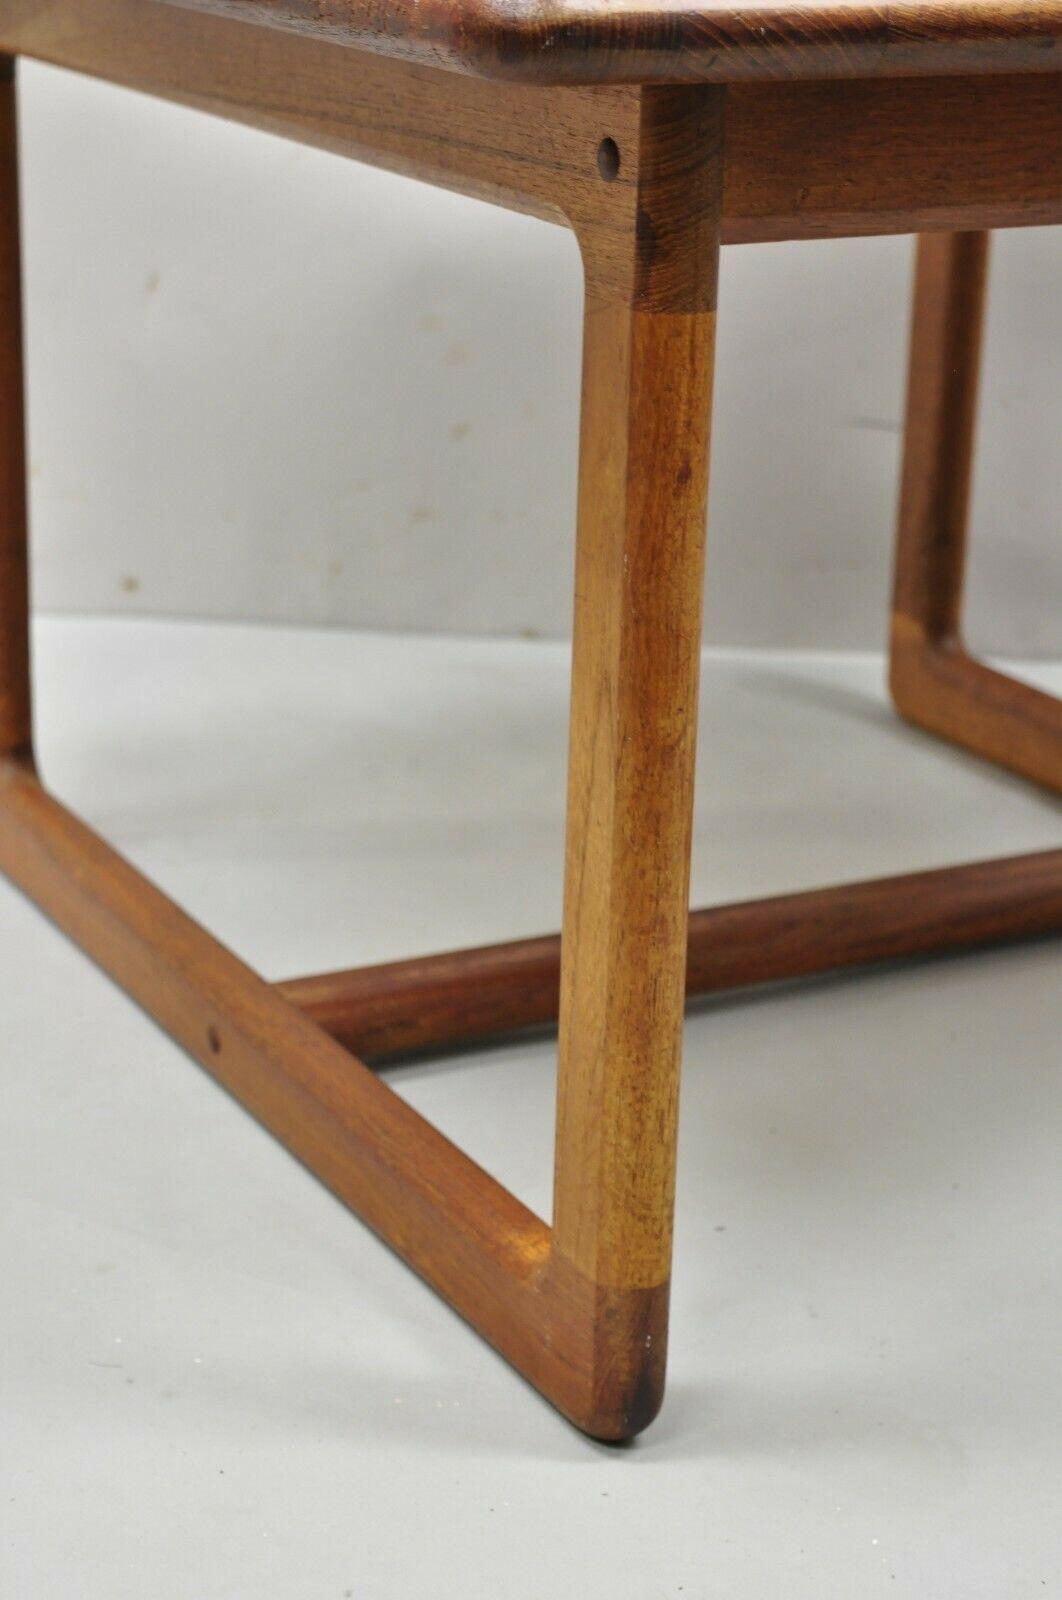 Vintage Mid Century Danish Modern Teak Wood Square Side End Table In Good Condition For Sale In Philadelphia, PA